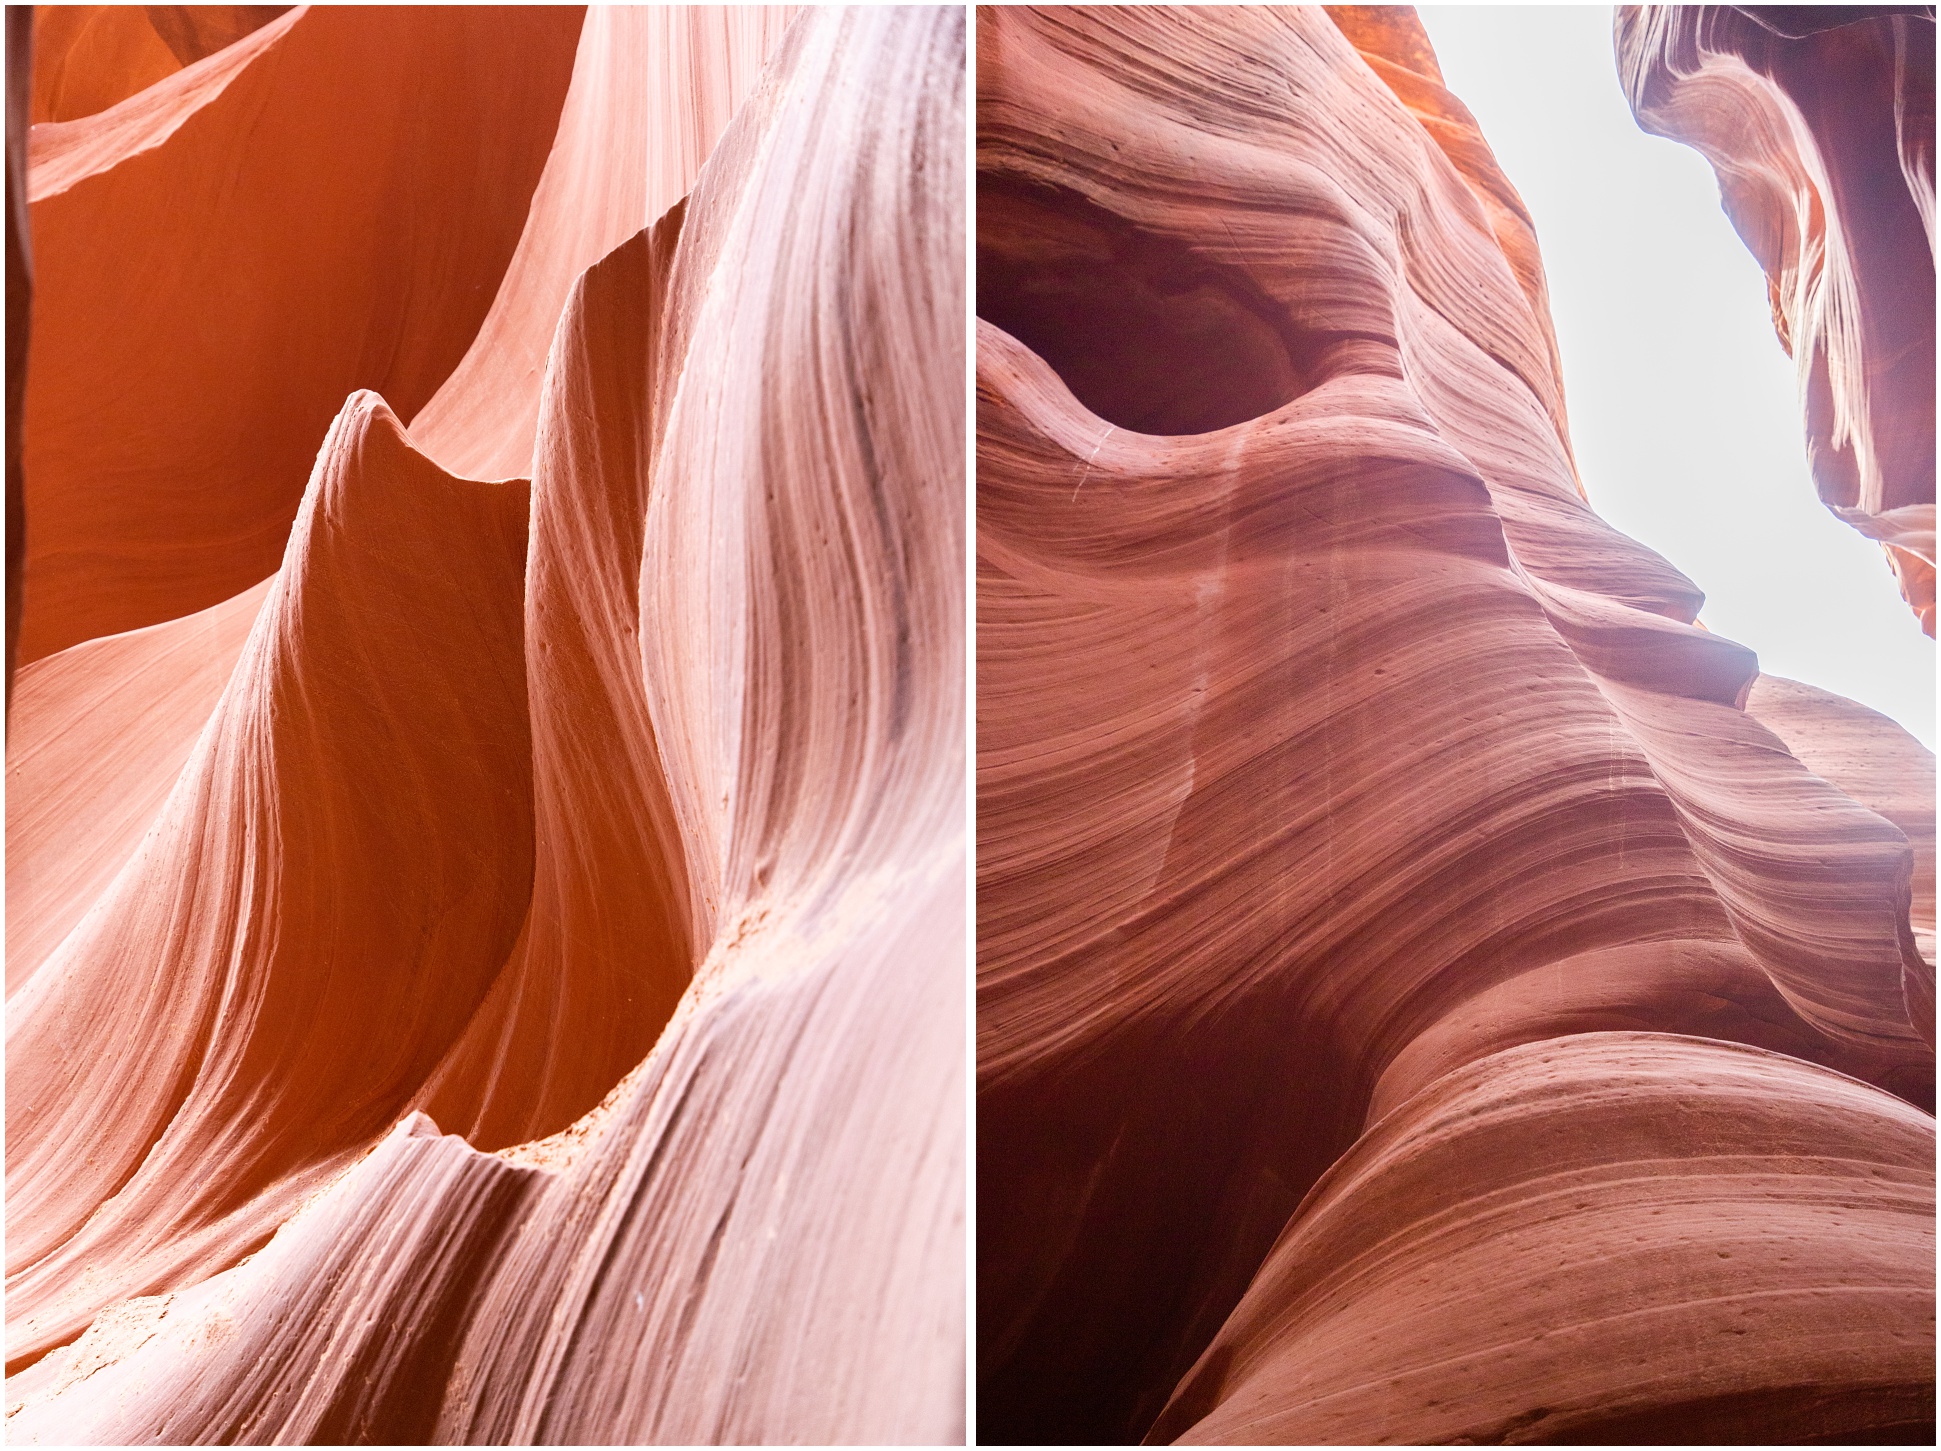 Two images of the Lower Antelope Canyon during Ken's Tours